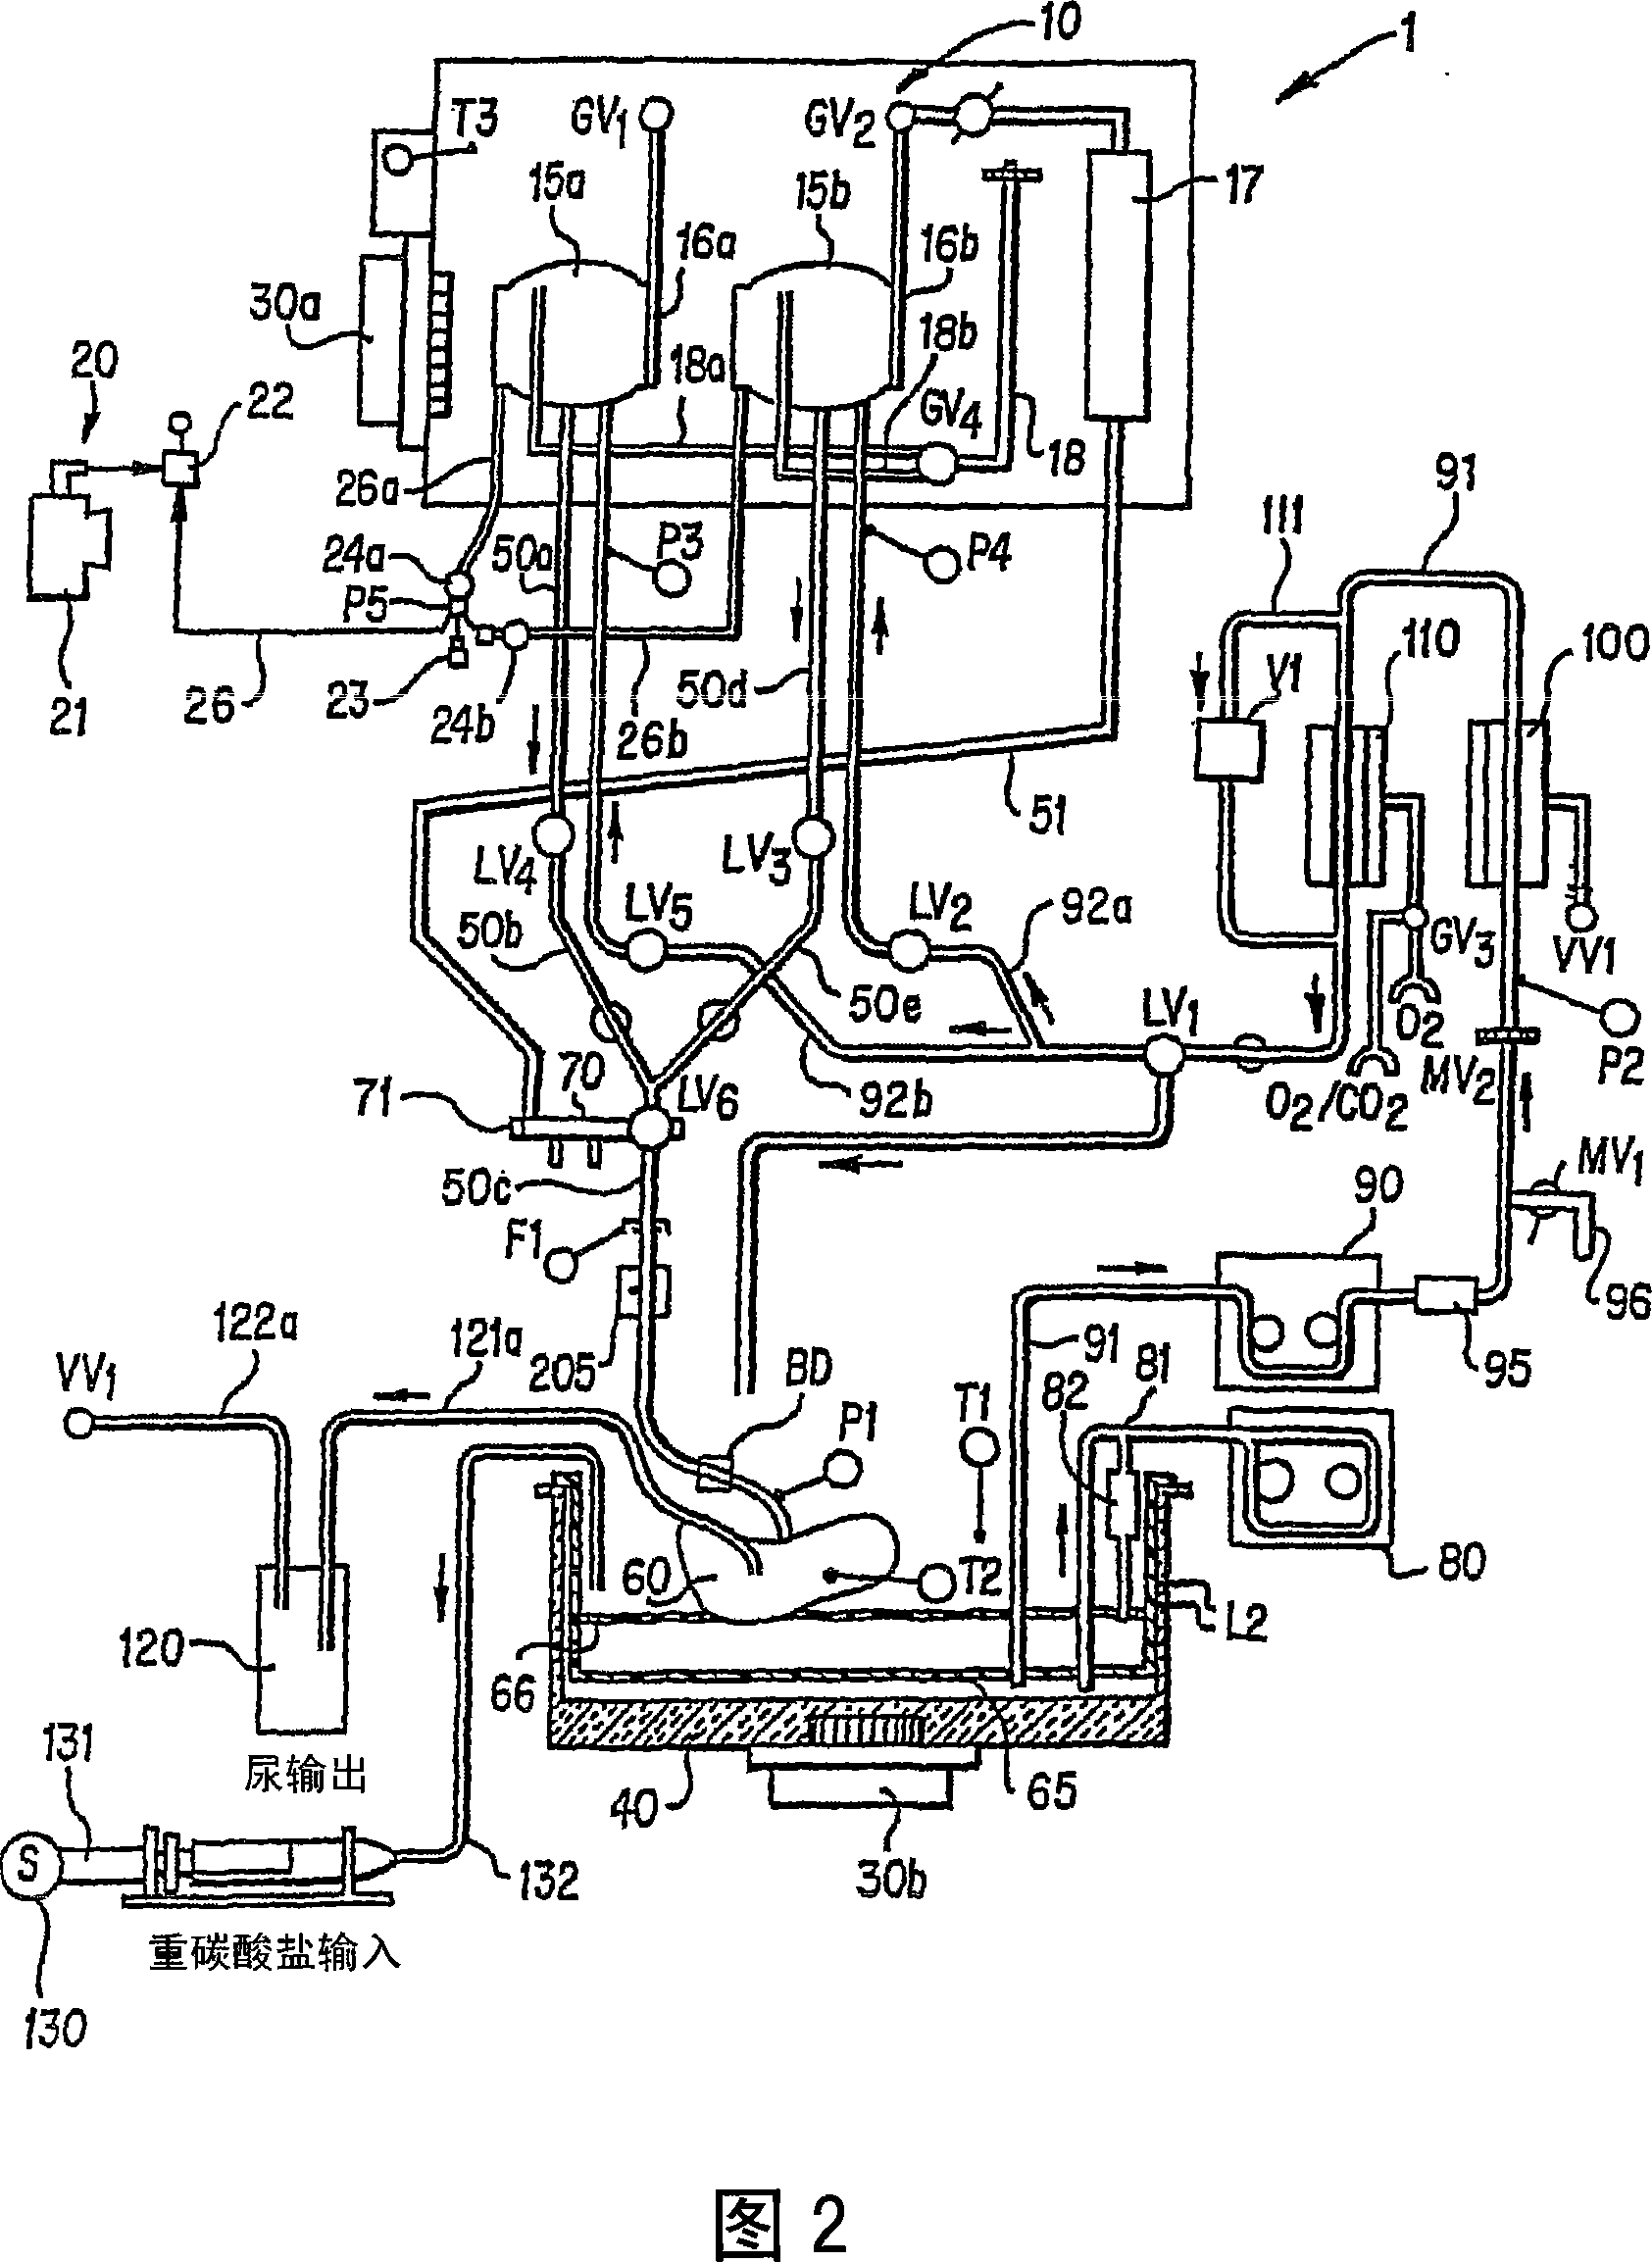 Apparatus and method for determining effects of a substance on an organ